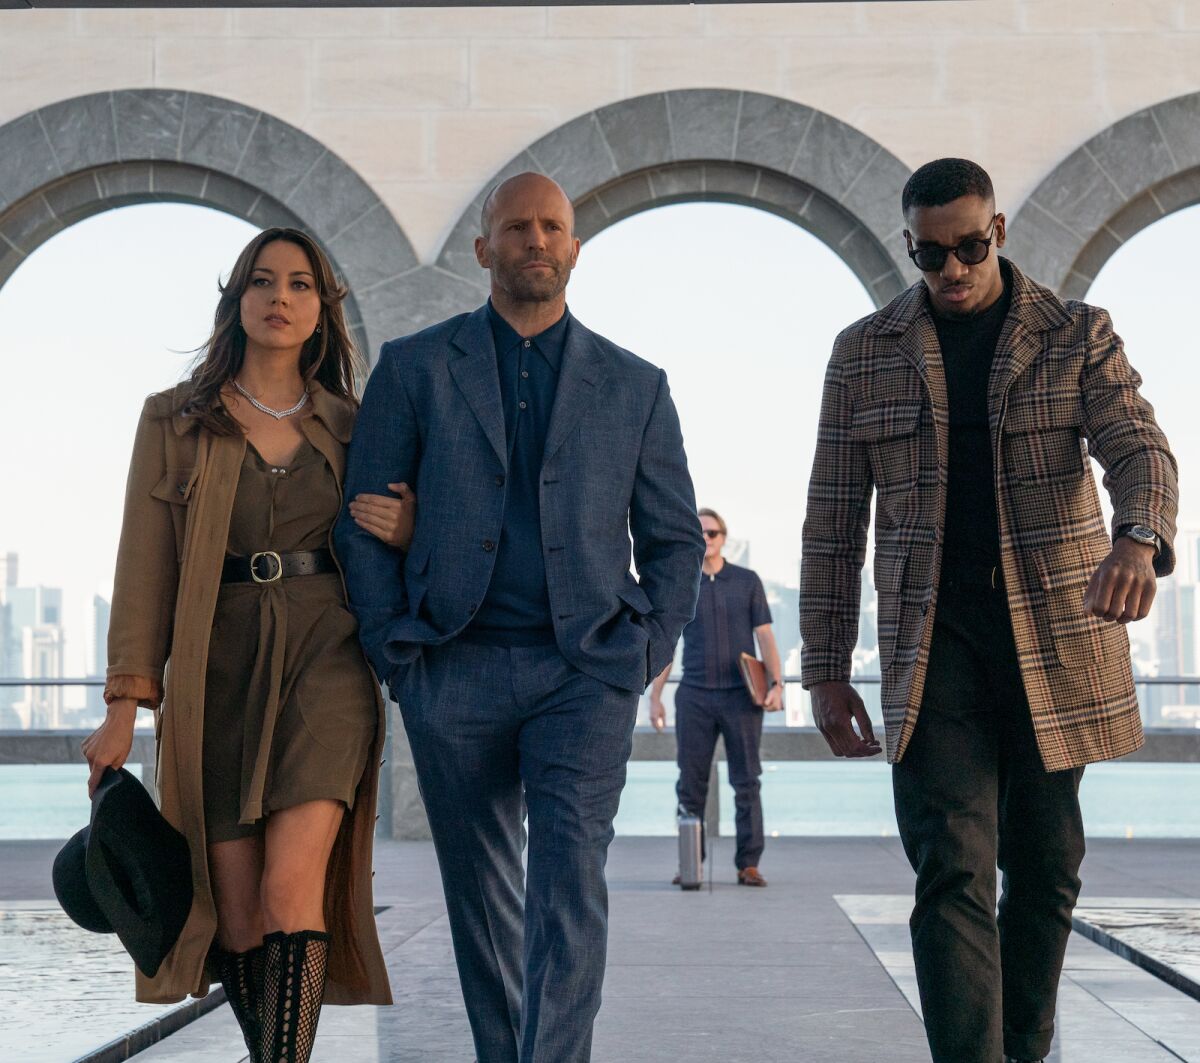 Aubrey Plaza, from left, Jason Statham and Bugzy Malone in the movie "Operation Fortune: Ruse de guerre."